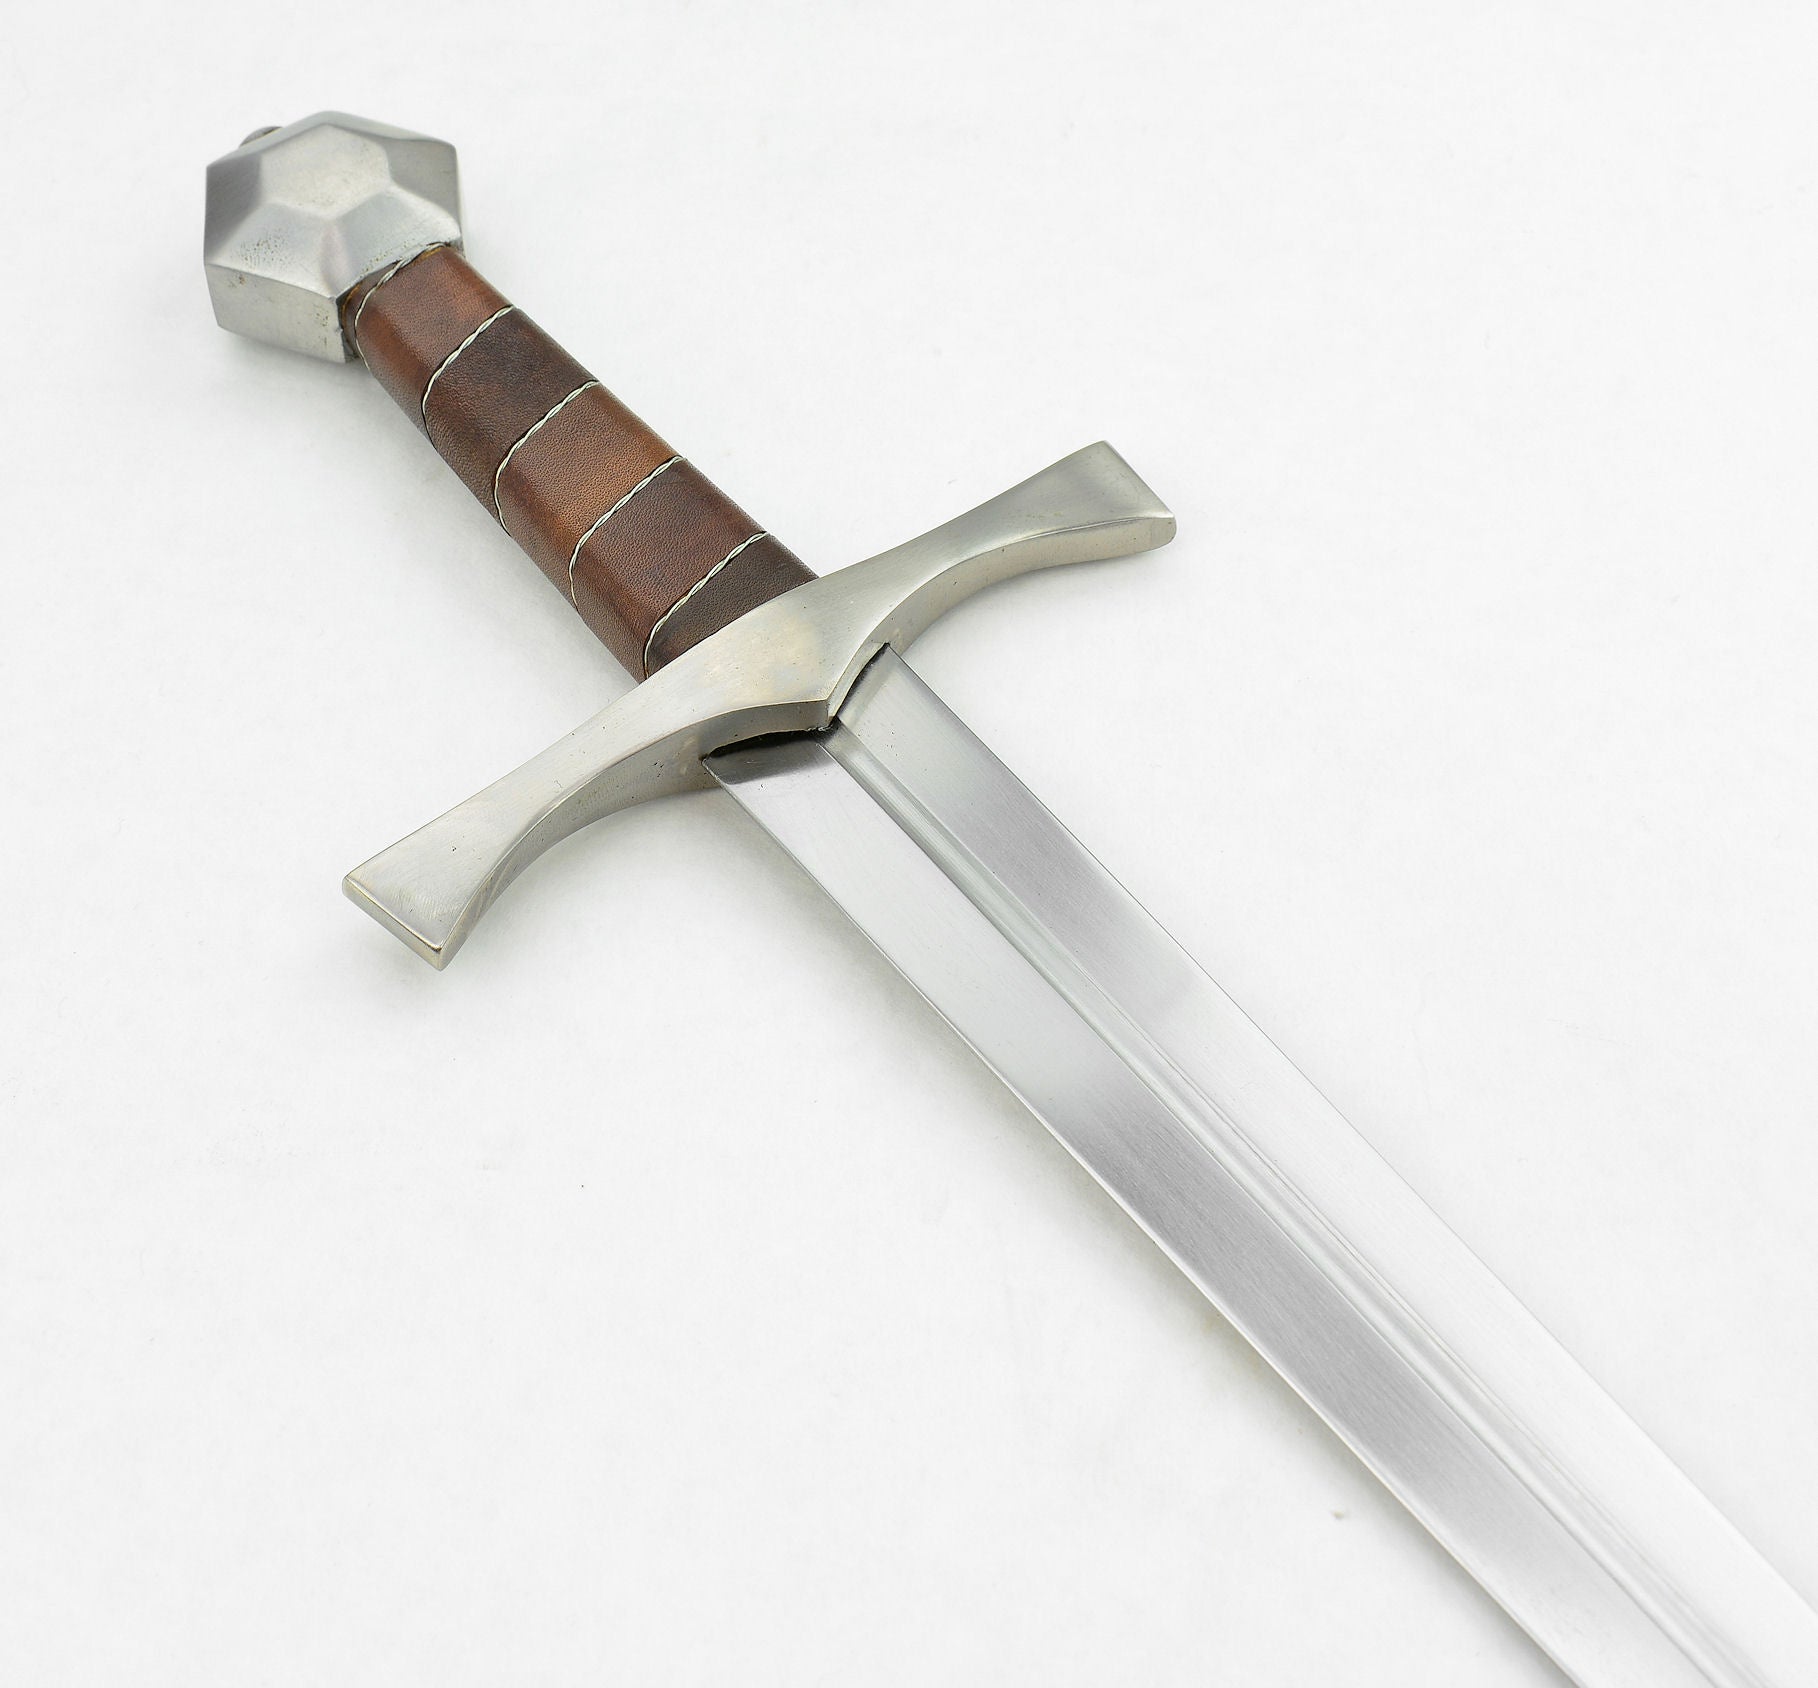 Late Medieval Knightly Dagger